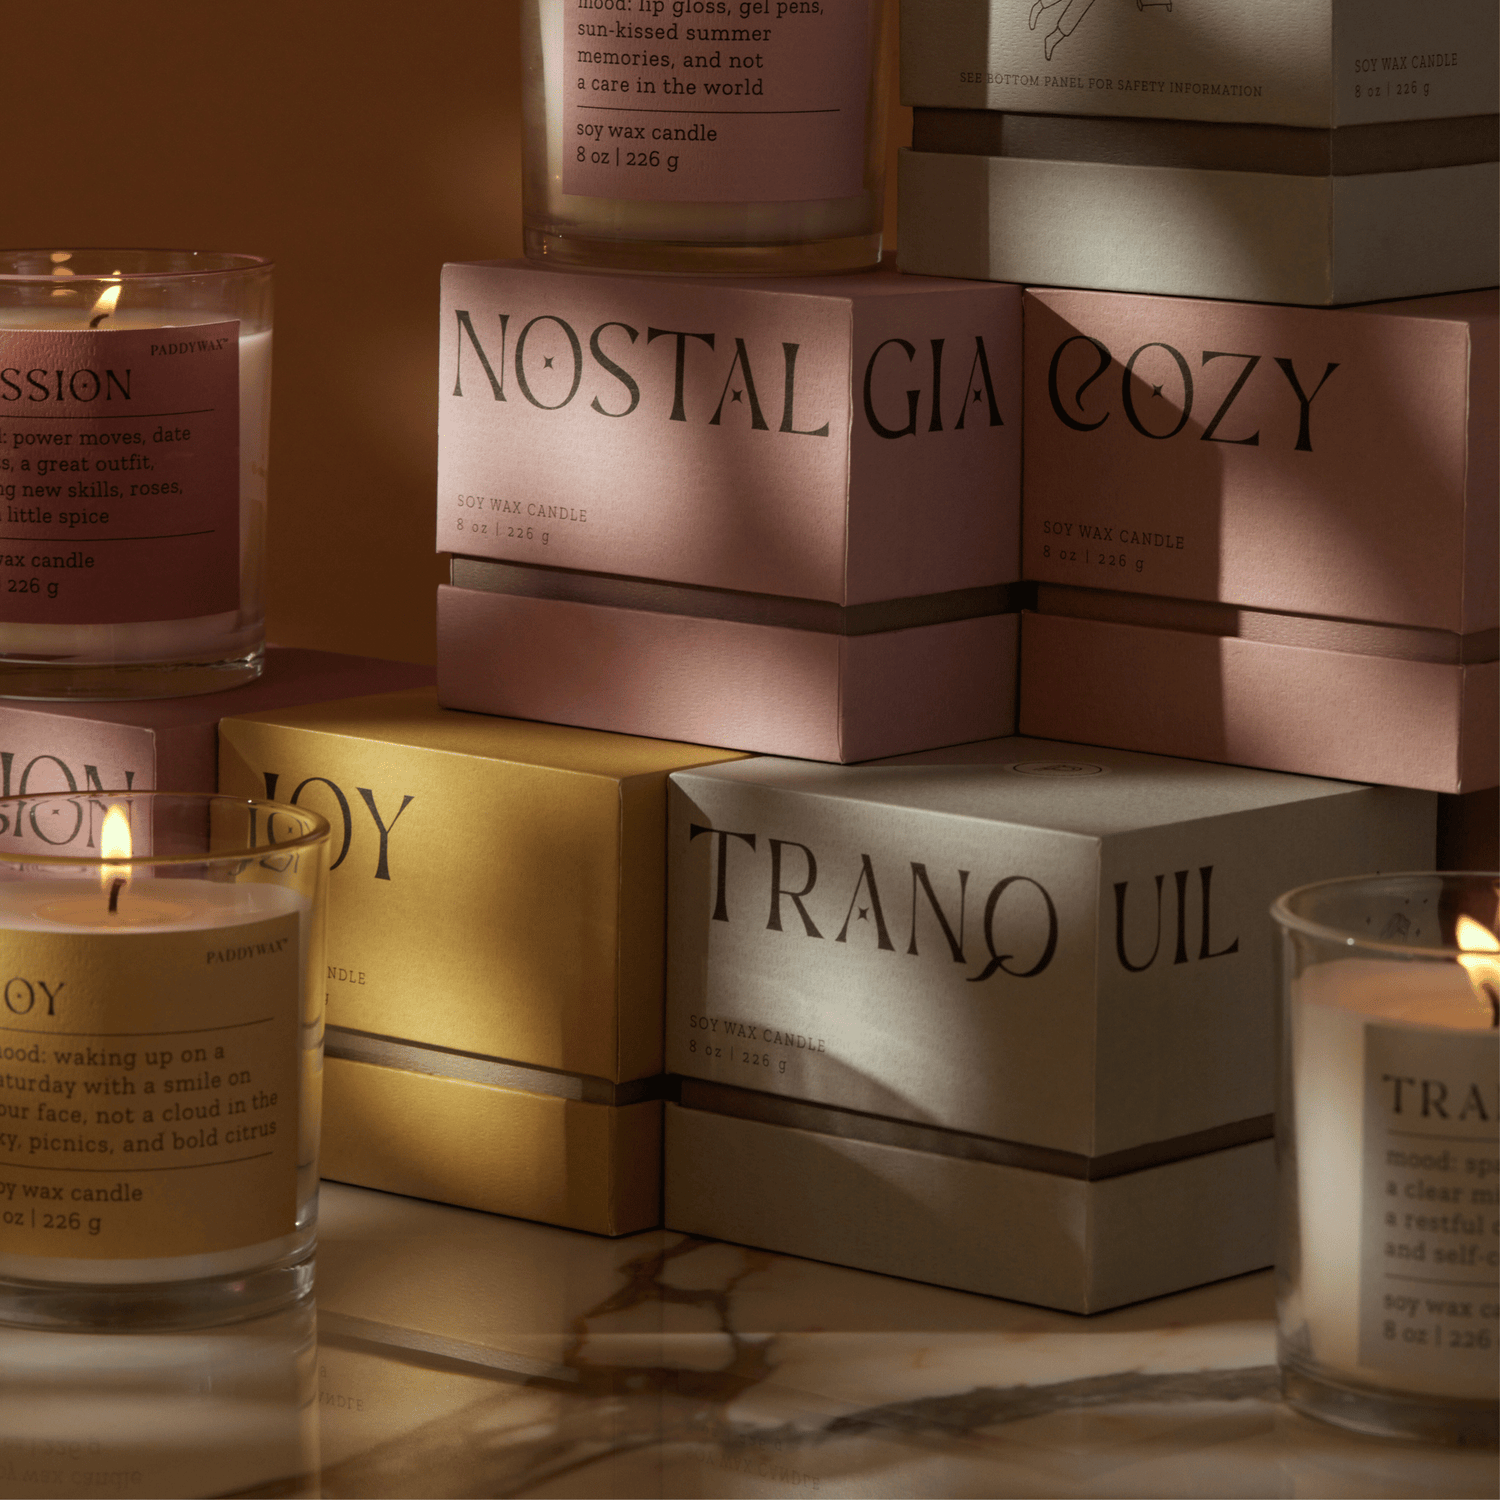 Mood Collection Candles and decorative boxes in deep, almost-unseeable shadow